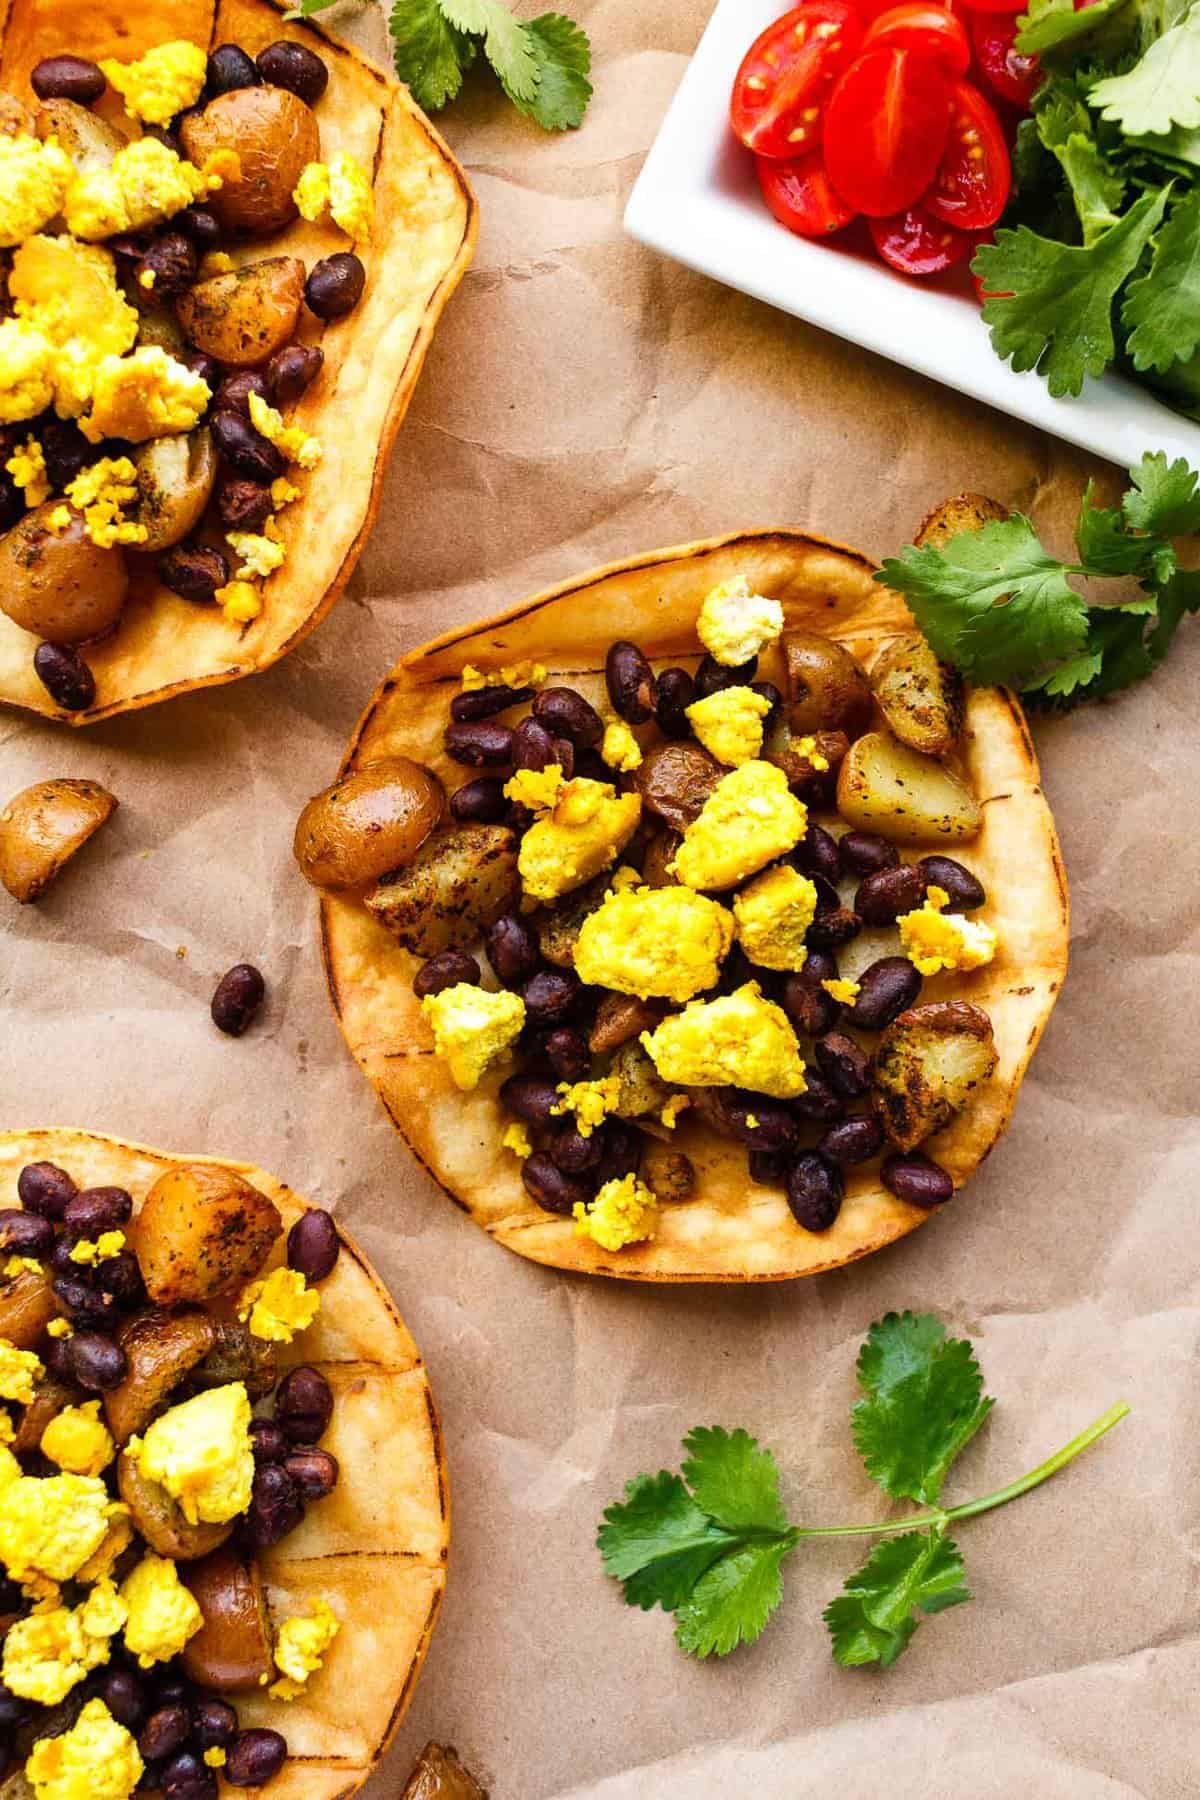 Vegan breakfast tostadas stopped with seasoned Creamer potatoes, spicy black beans, and scrambled tofu.